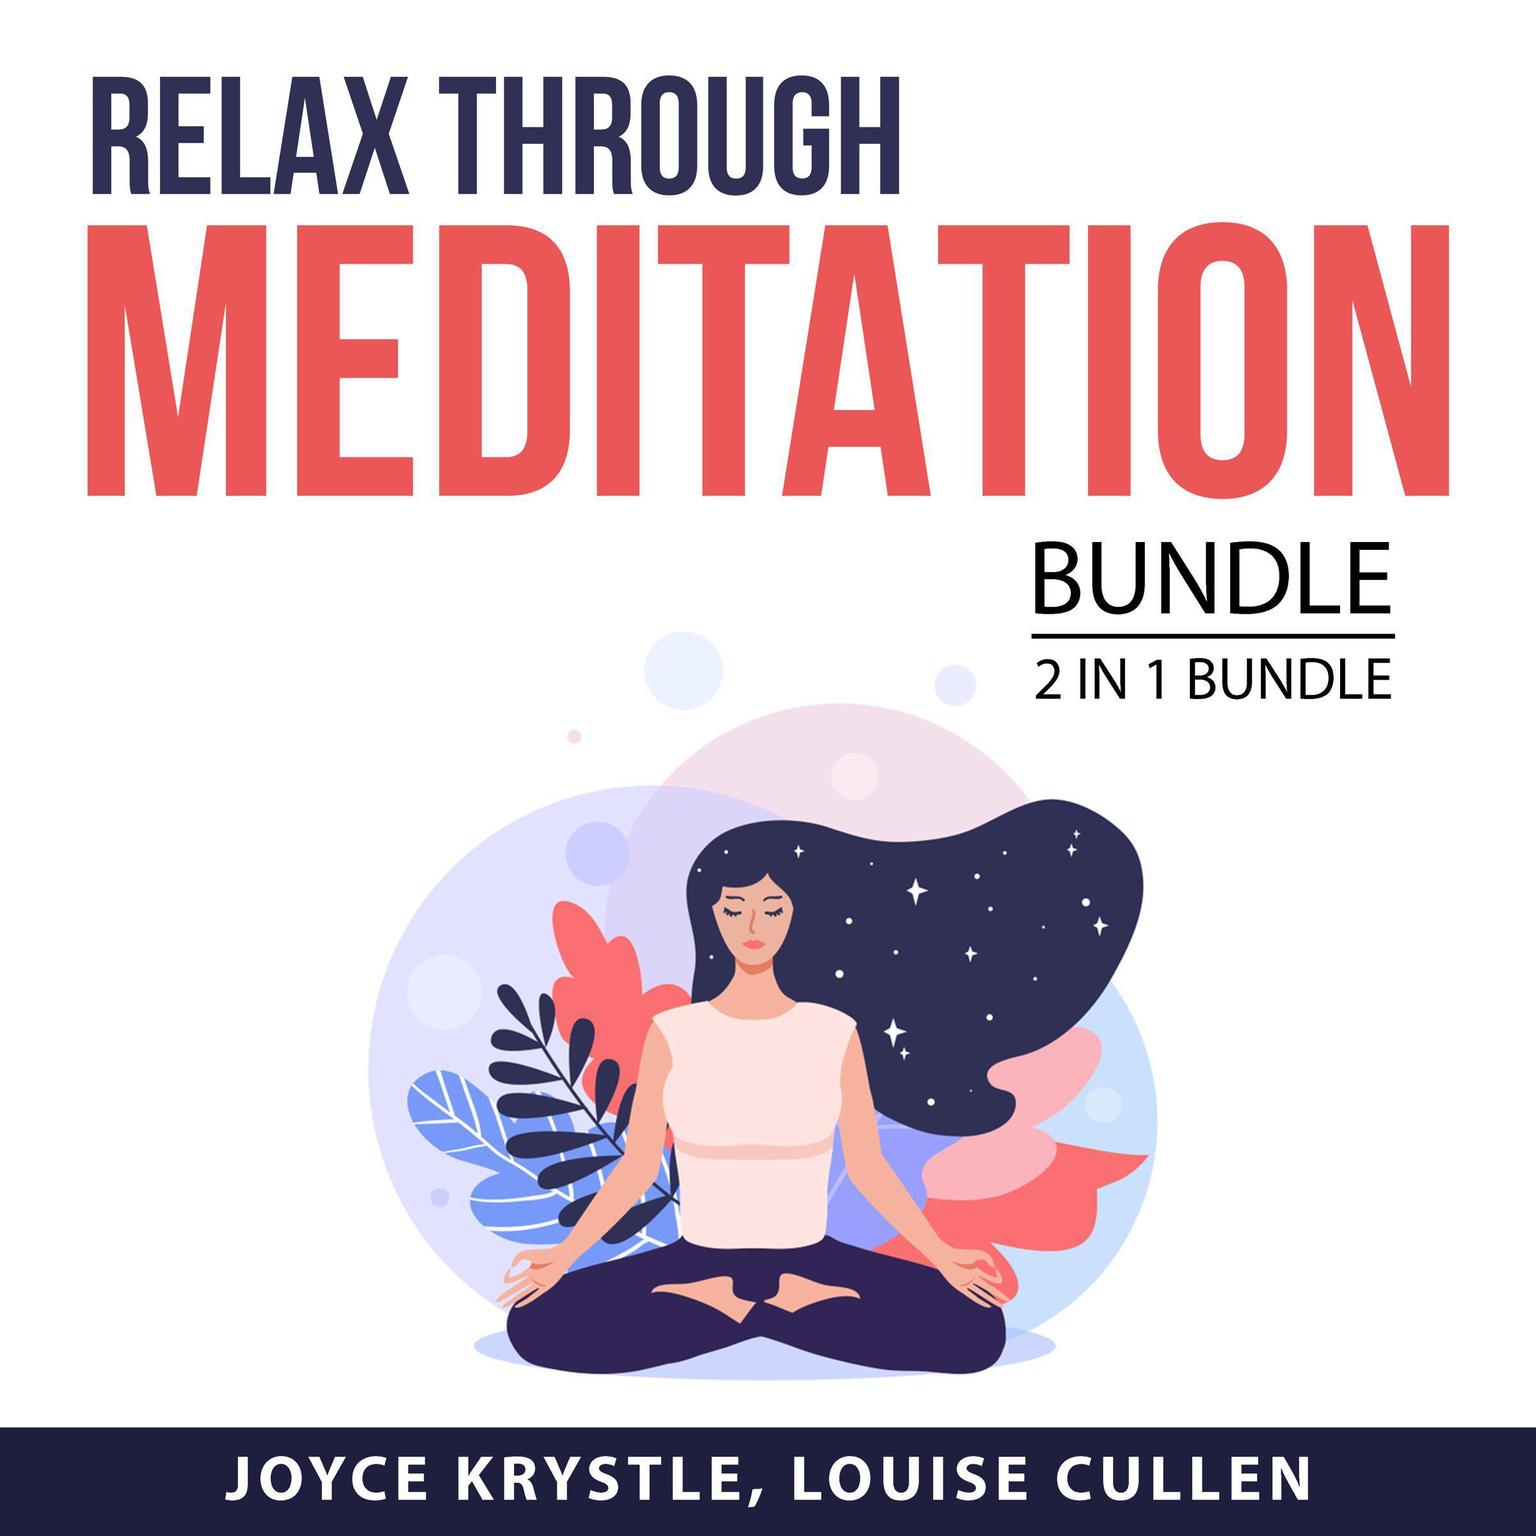 Relax Through Meditation Bundle, 2 in 1 Bundle: Practical Meditation and How to Relax Audiobook, by Joyce Krystle